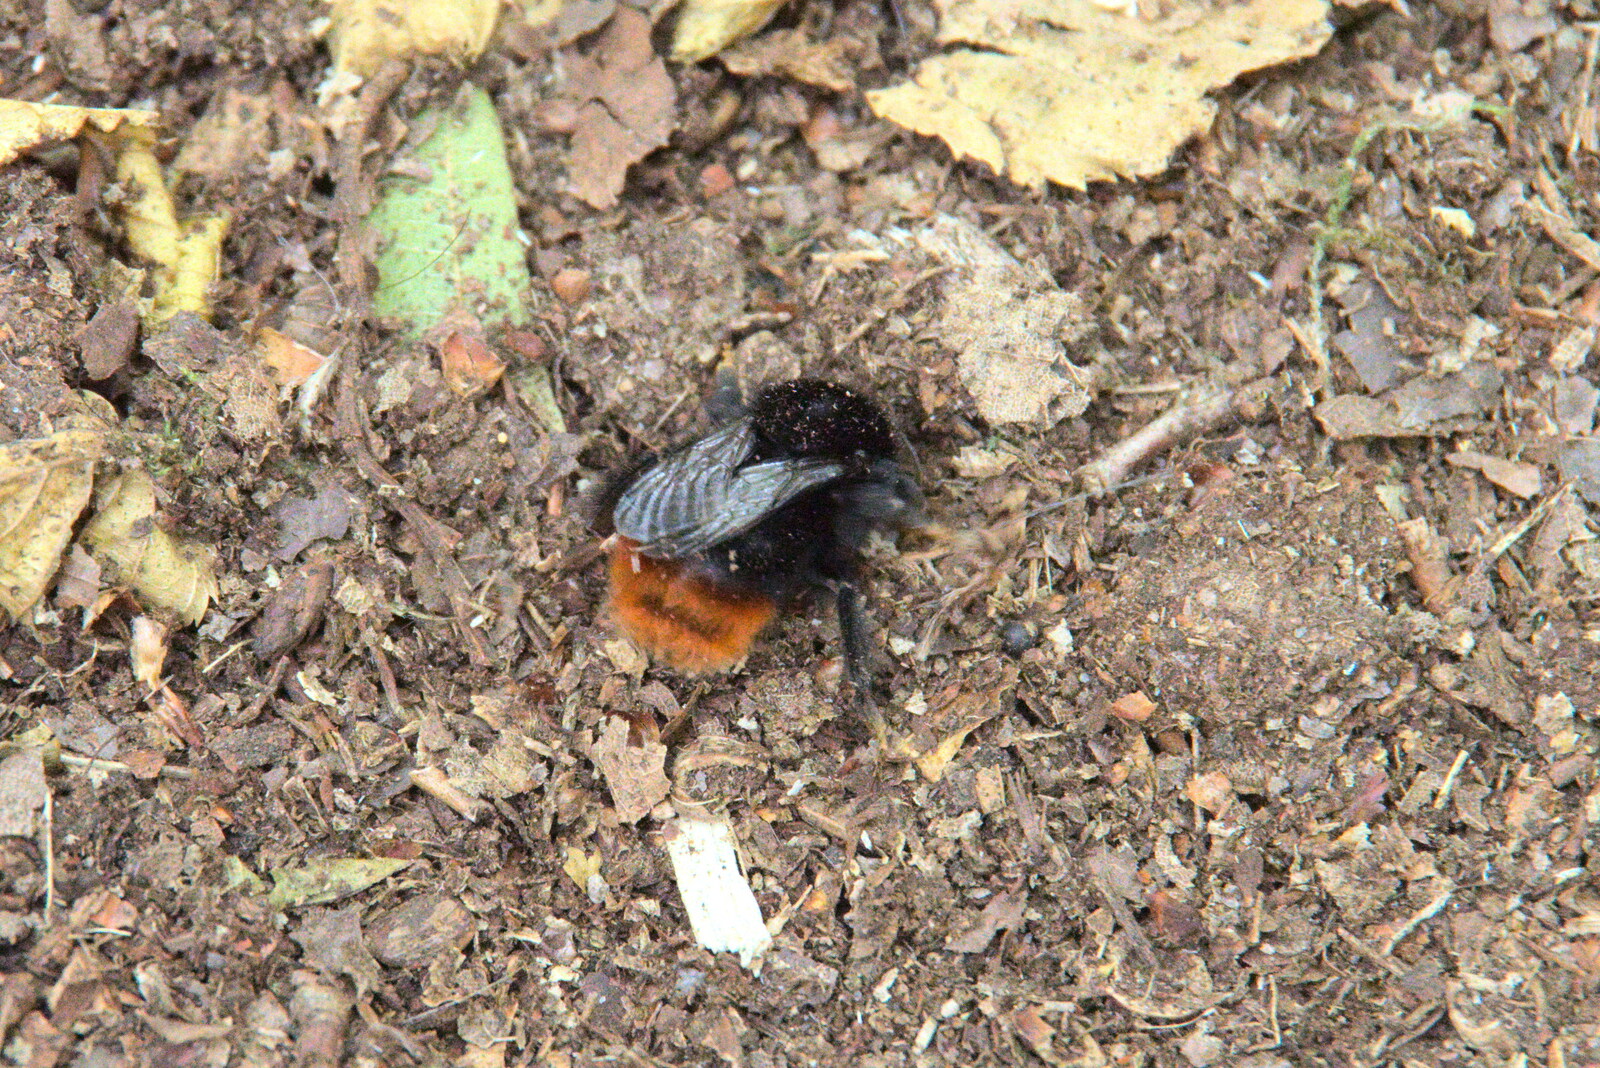 A Bumble Bee flies around just off the ground from Jules Visits, and a Trip to Tyrrel's Wood, Pulham Market, Norfolk - 16th August 2020